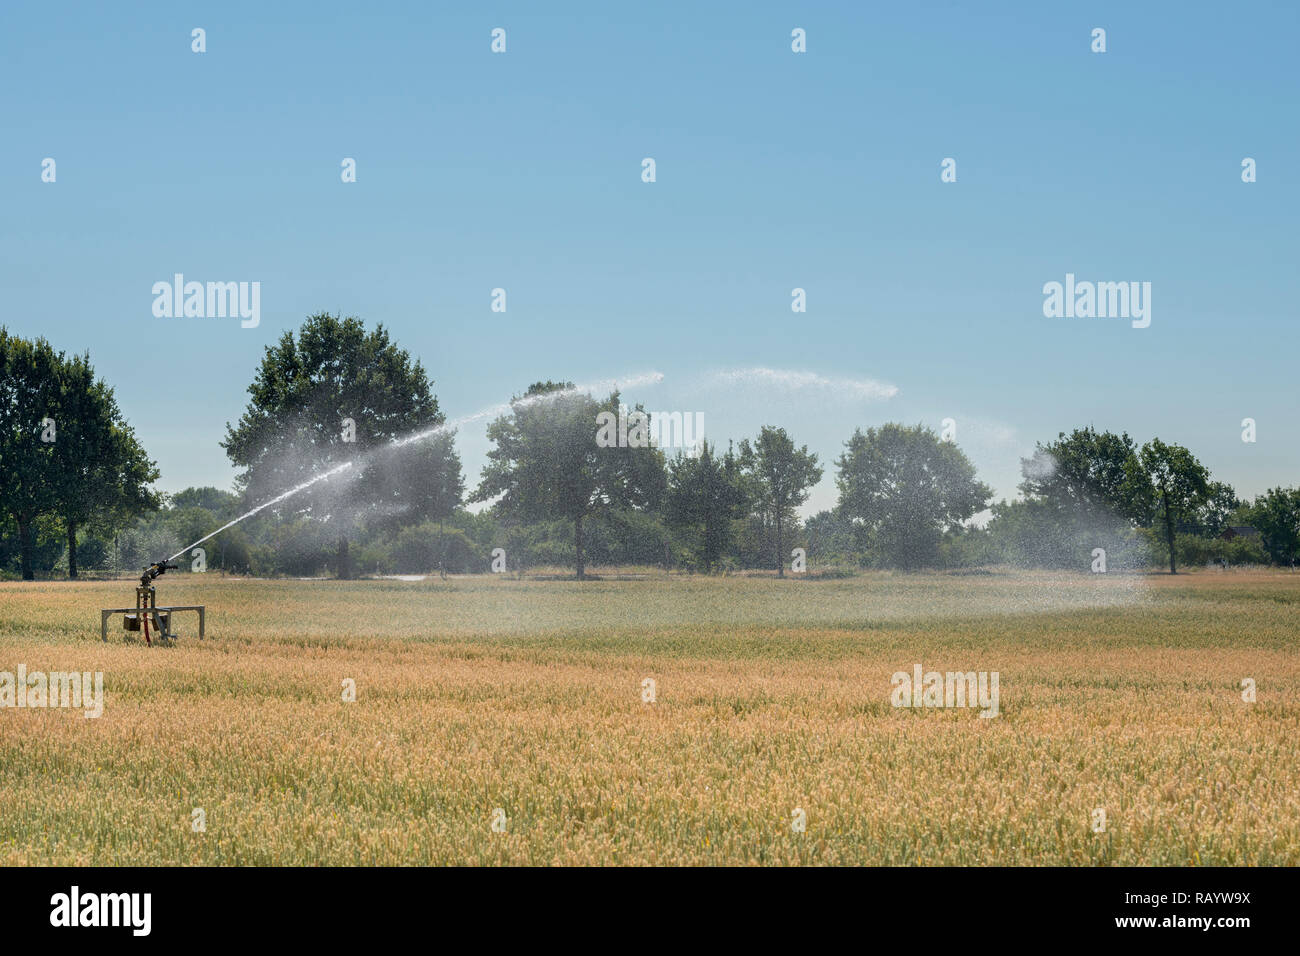 Portable sprinkler irrigation machine spraying water over farmland during a drought summer, hot and dry summer 2018, Europe. Stock Photo